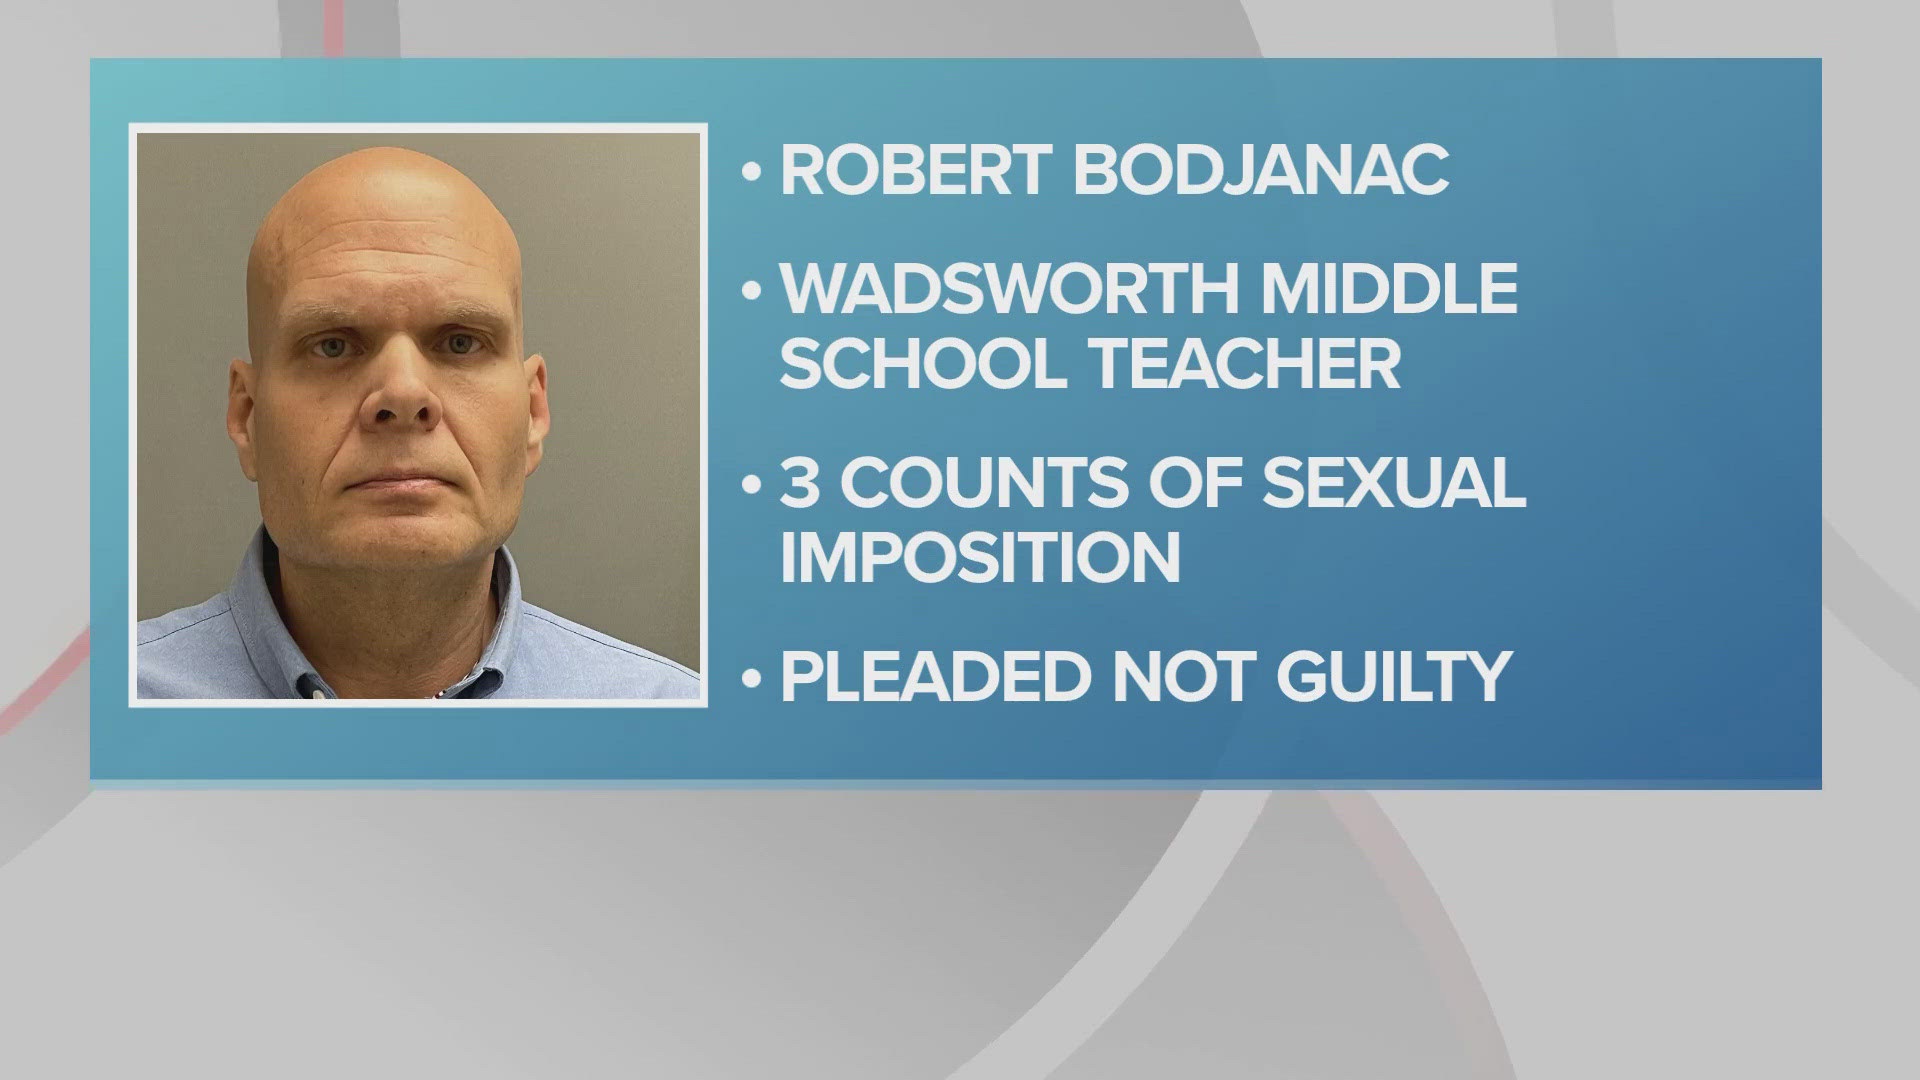 Robert Bodjanac, 46, has been charged with three misdemeanor counts of sexual imposition for 'actions involving three female middle school students.'